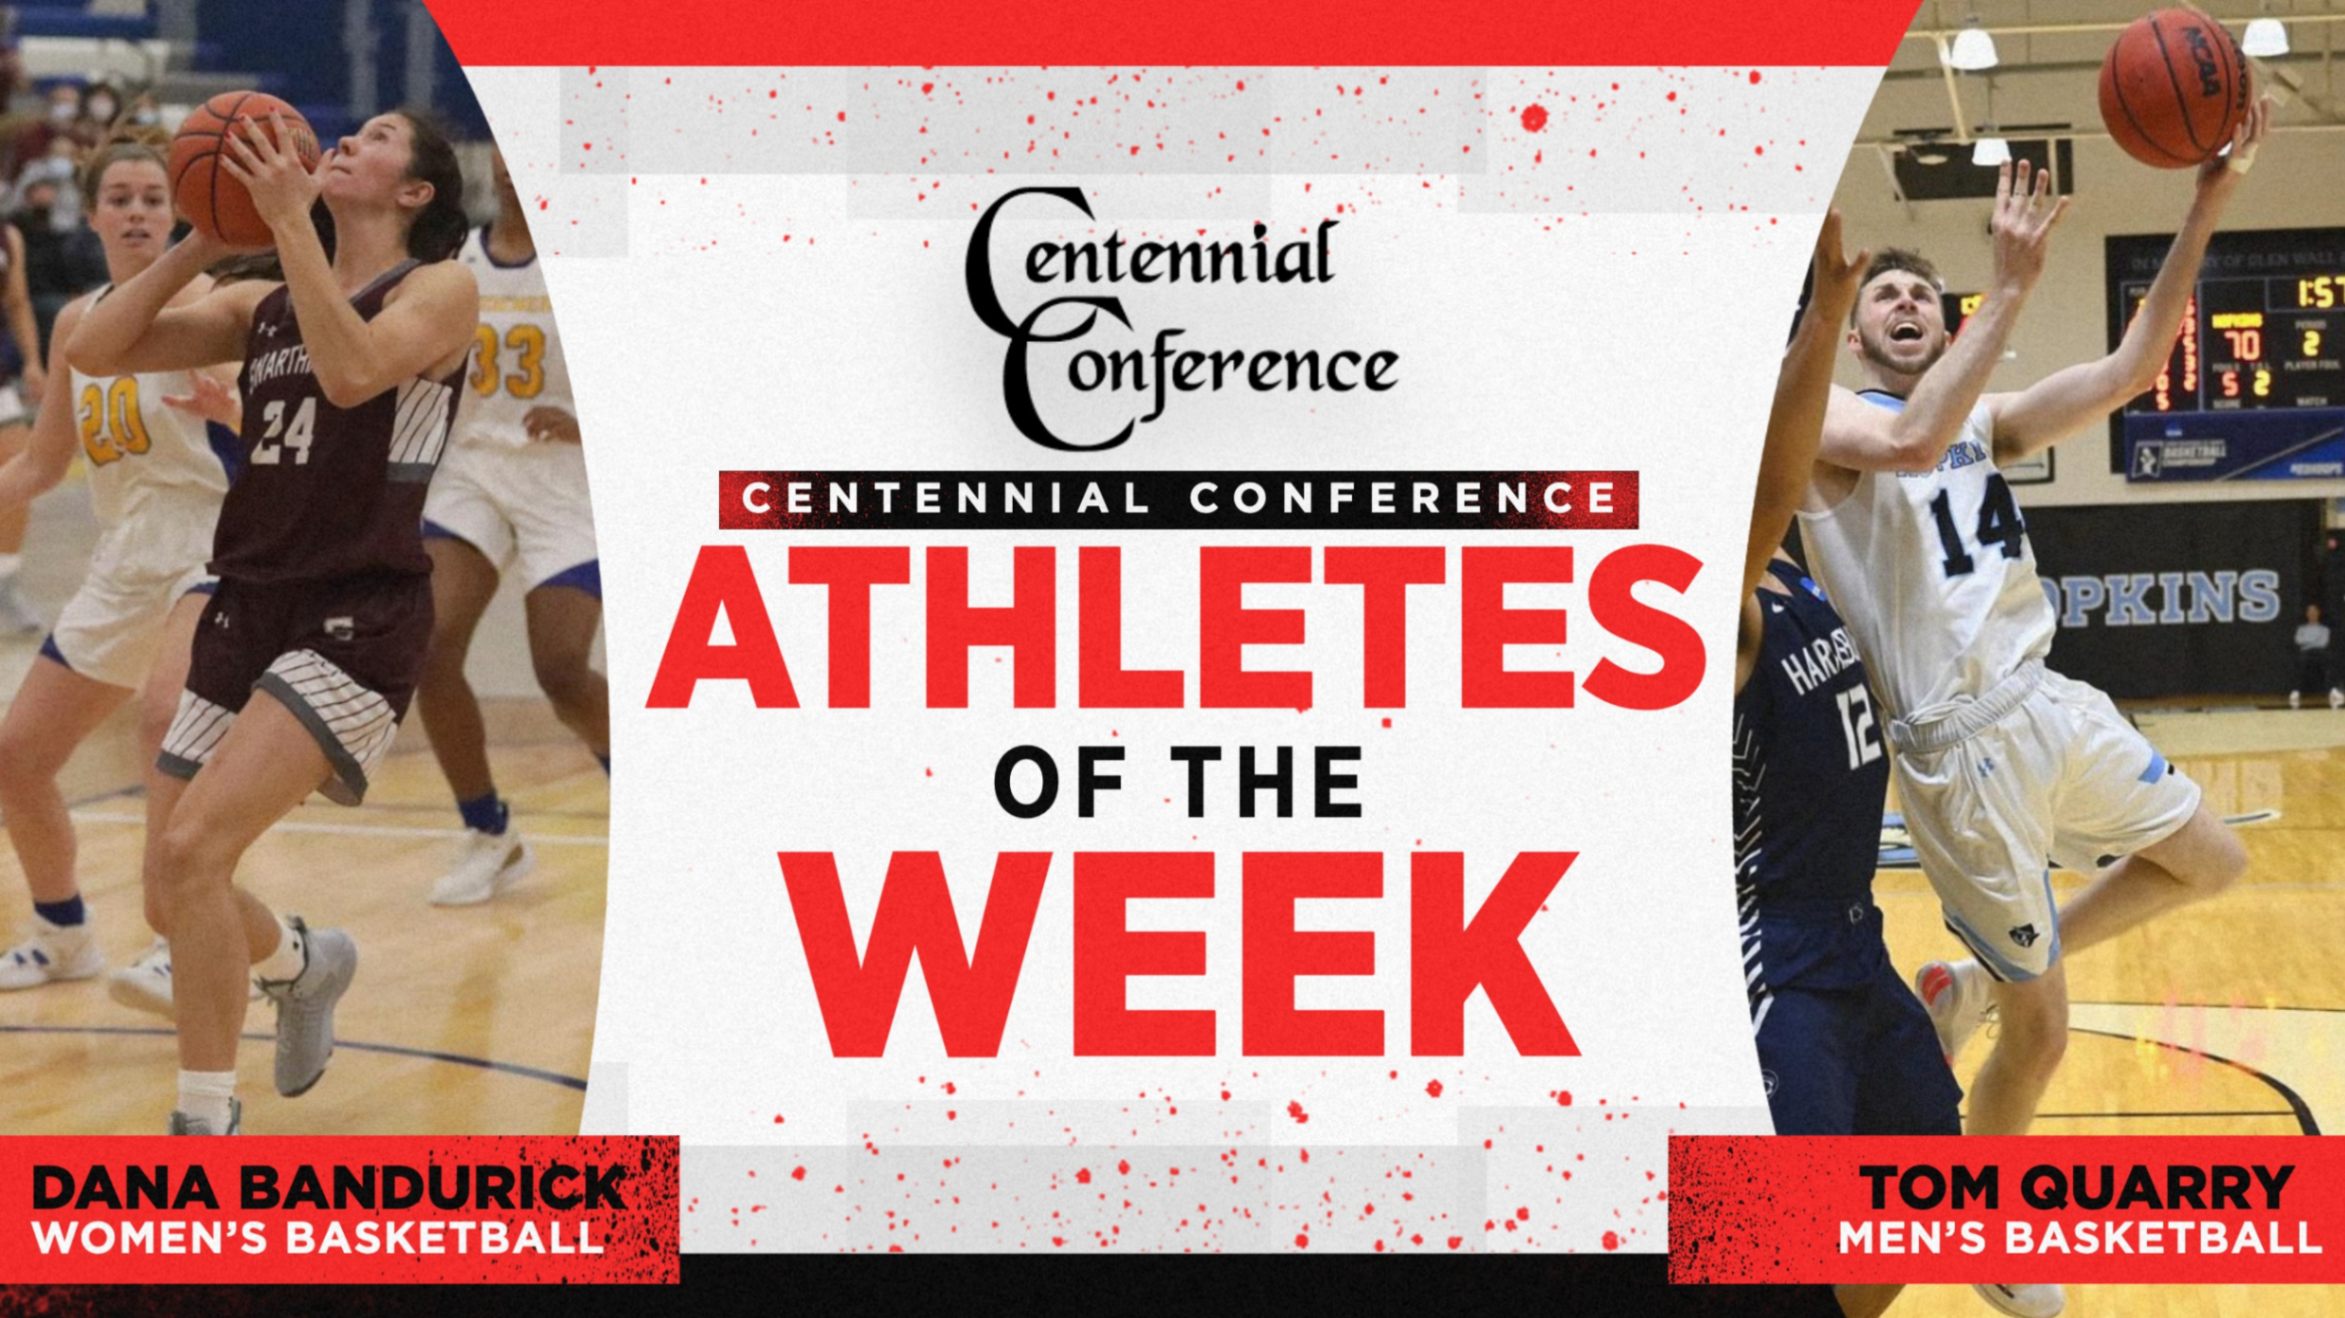 Centennial Conference Athletes of the Week - Jan. 3-9